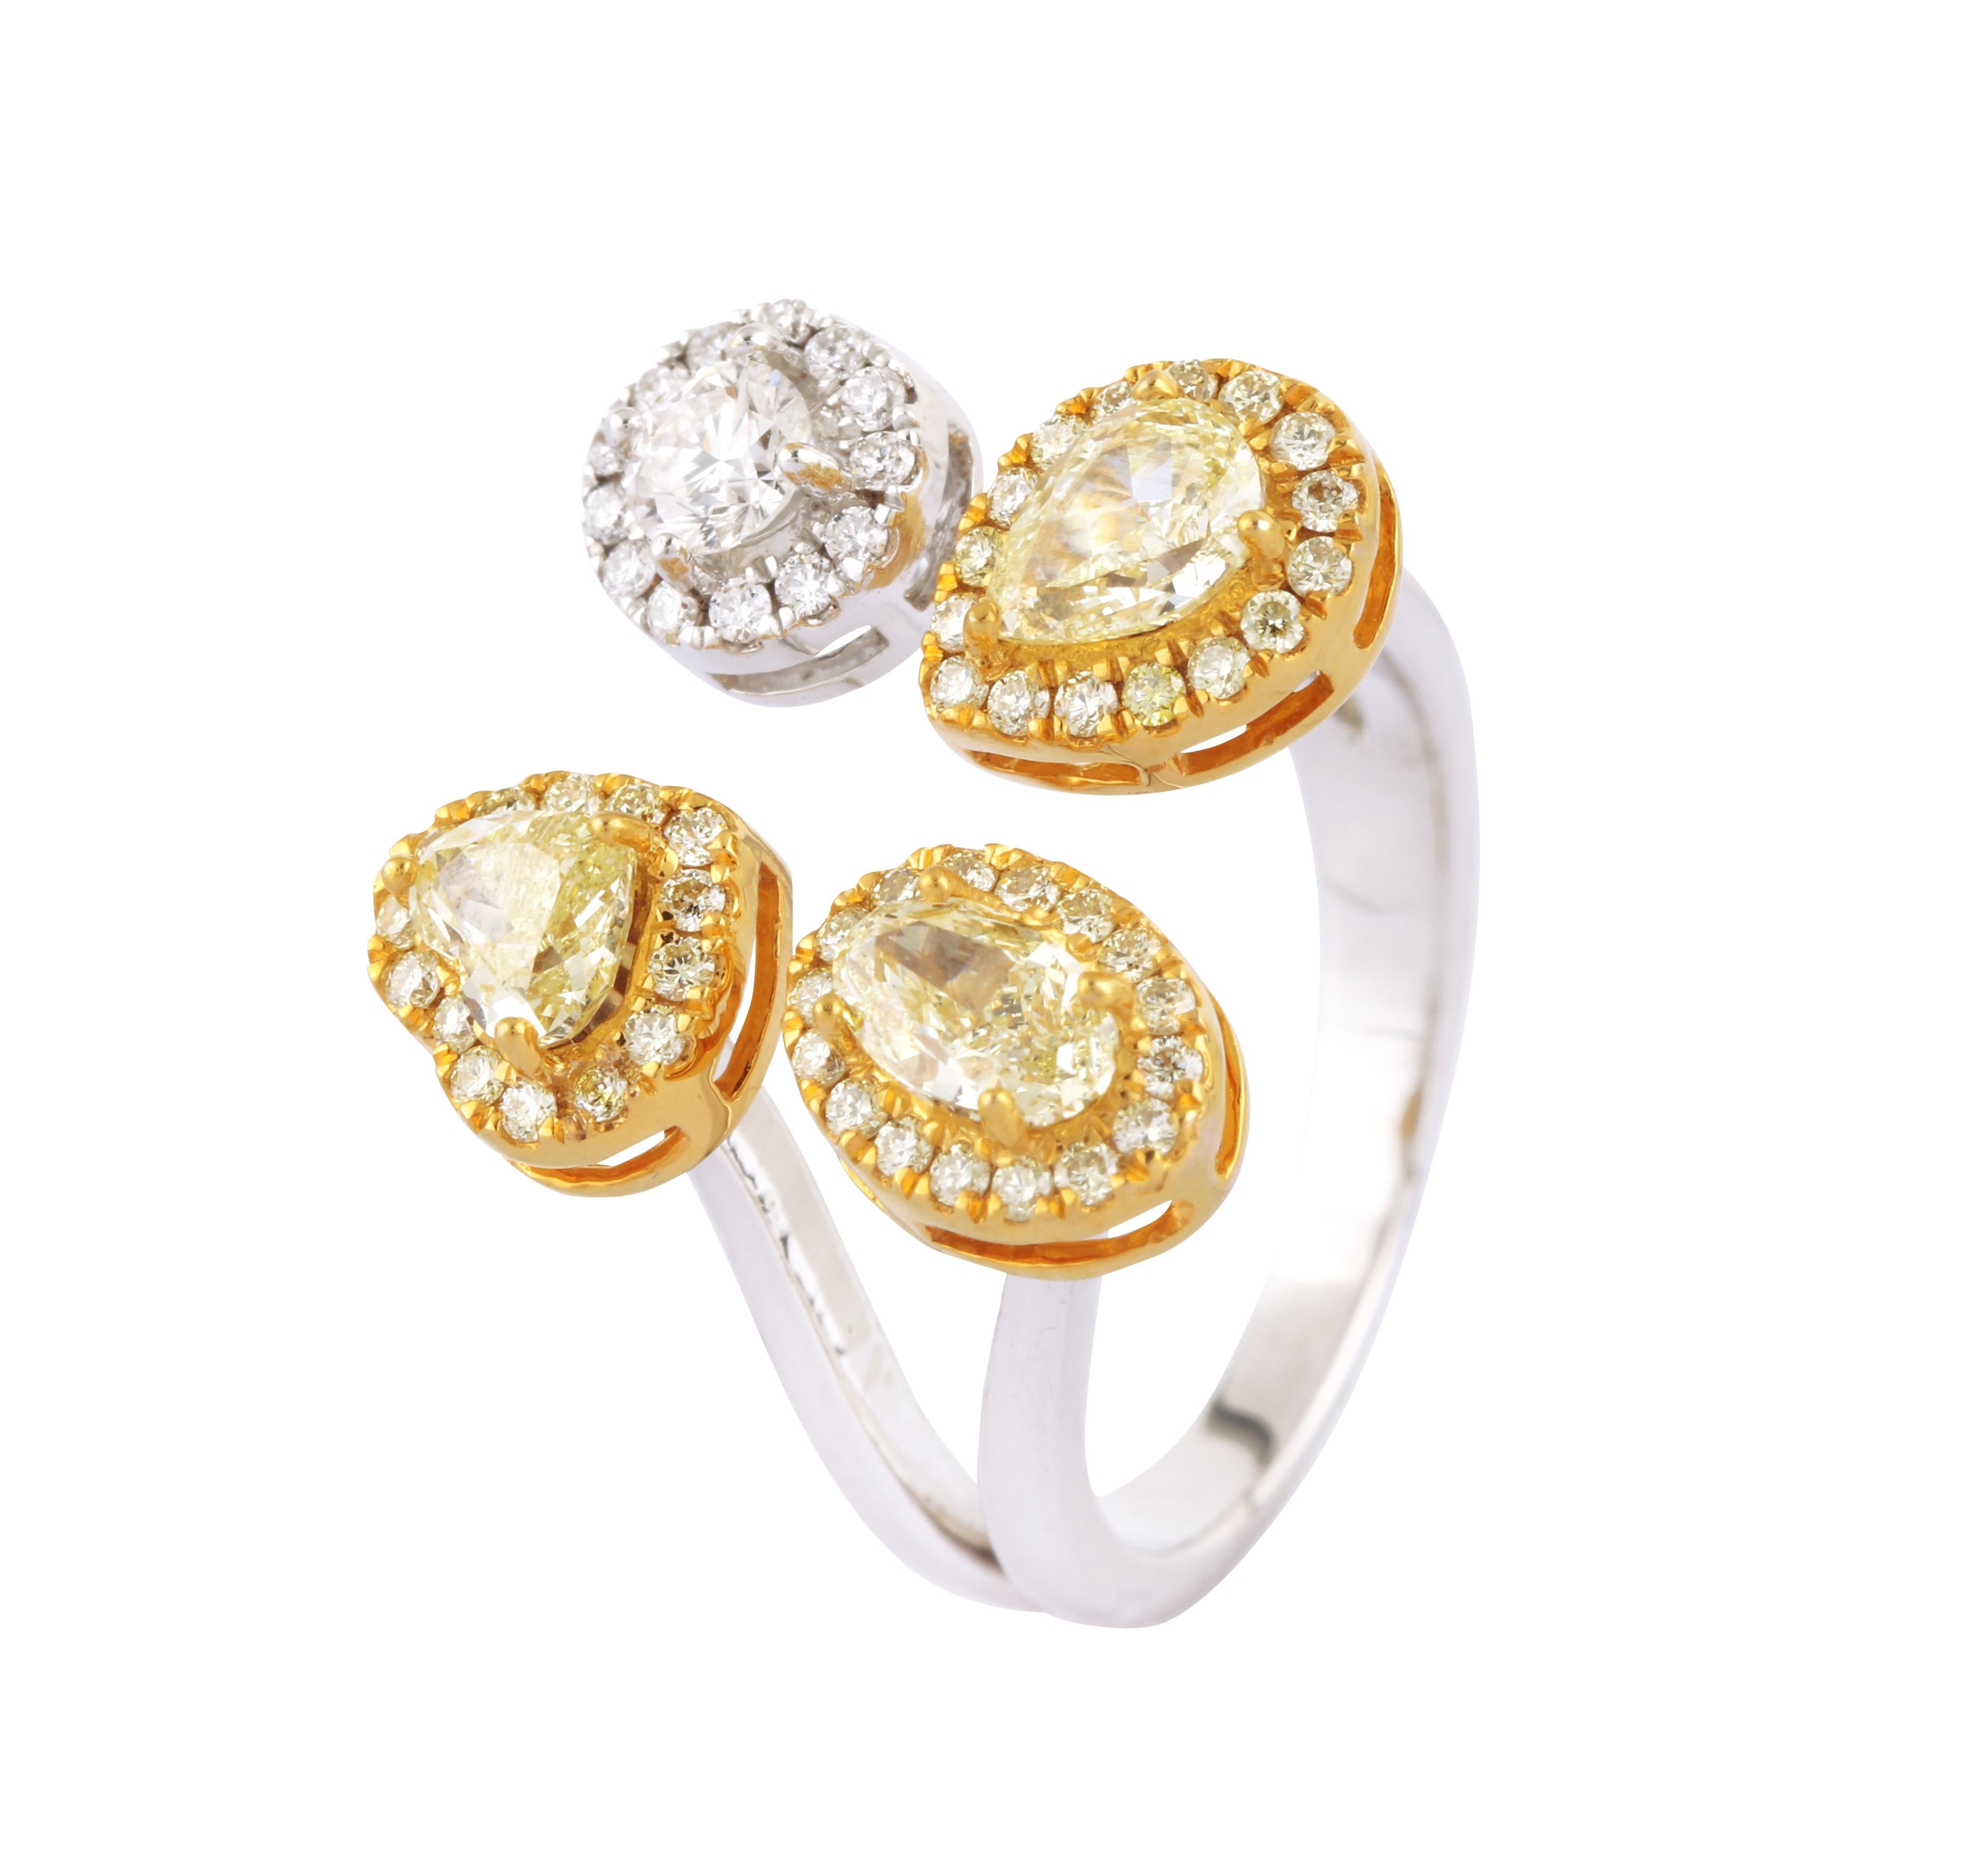 Brilliant Cut 18 Karat Gold 1.73 Carat White and Fancy Yellow Diamond Cocktail Ring For Sale